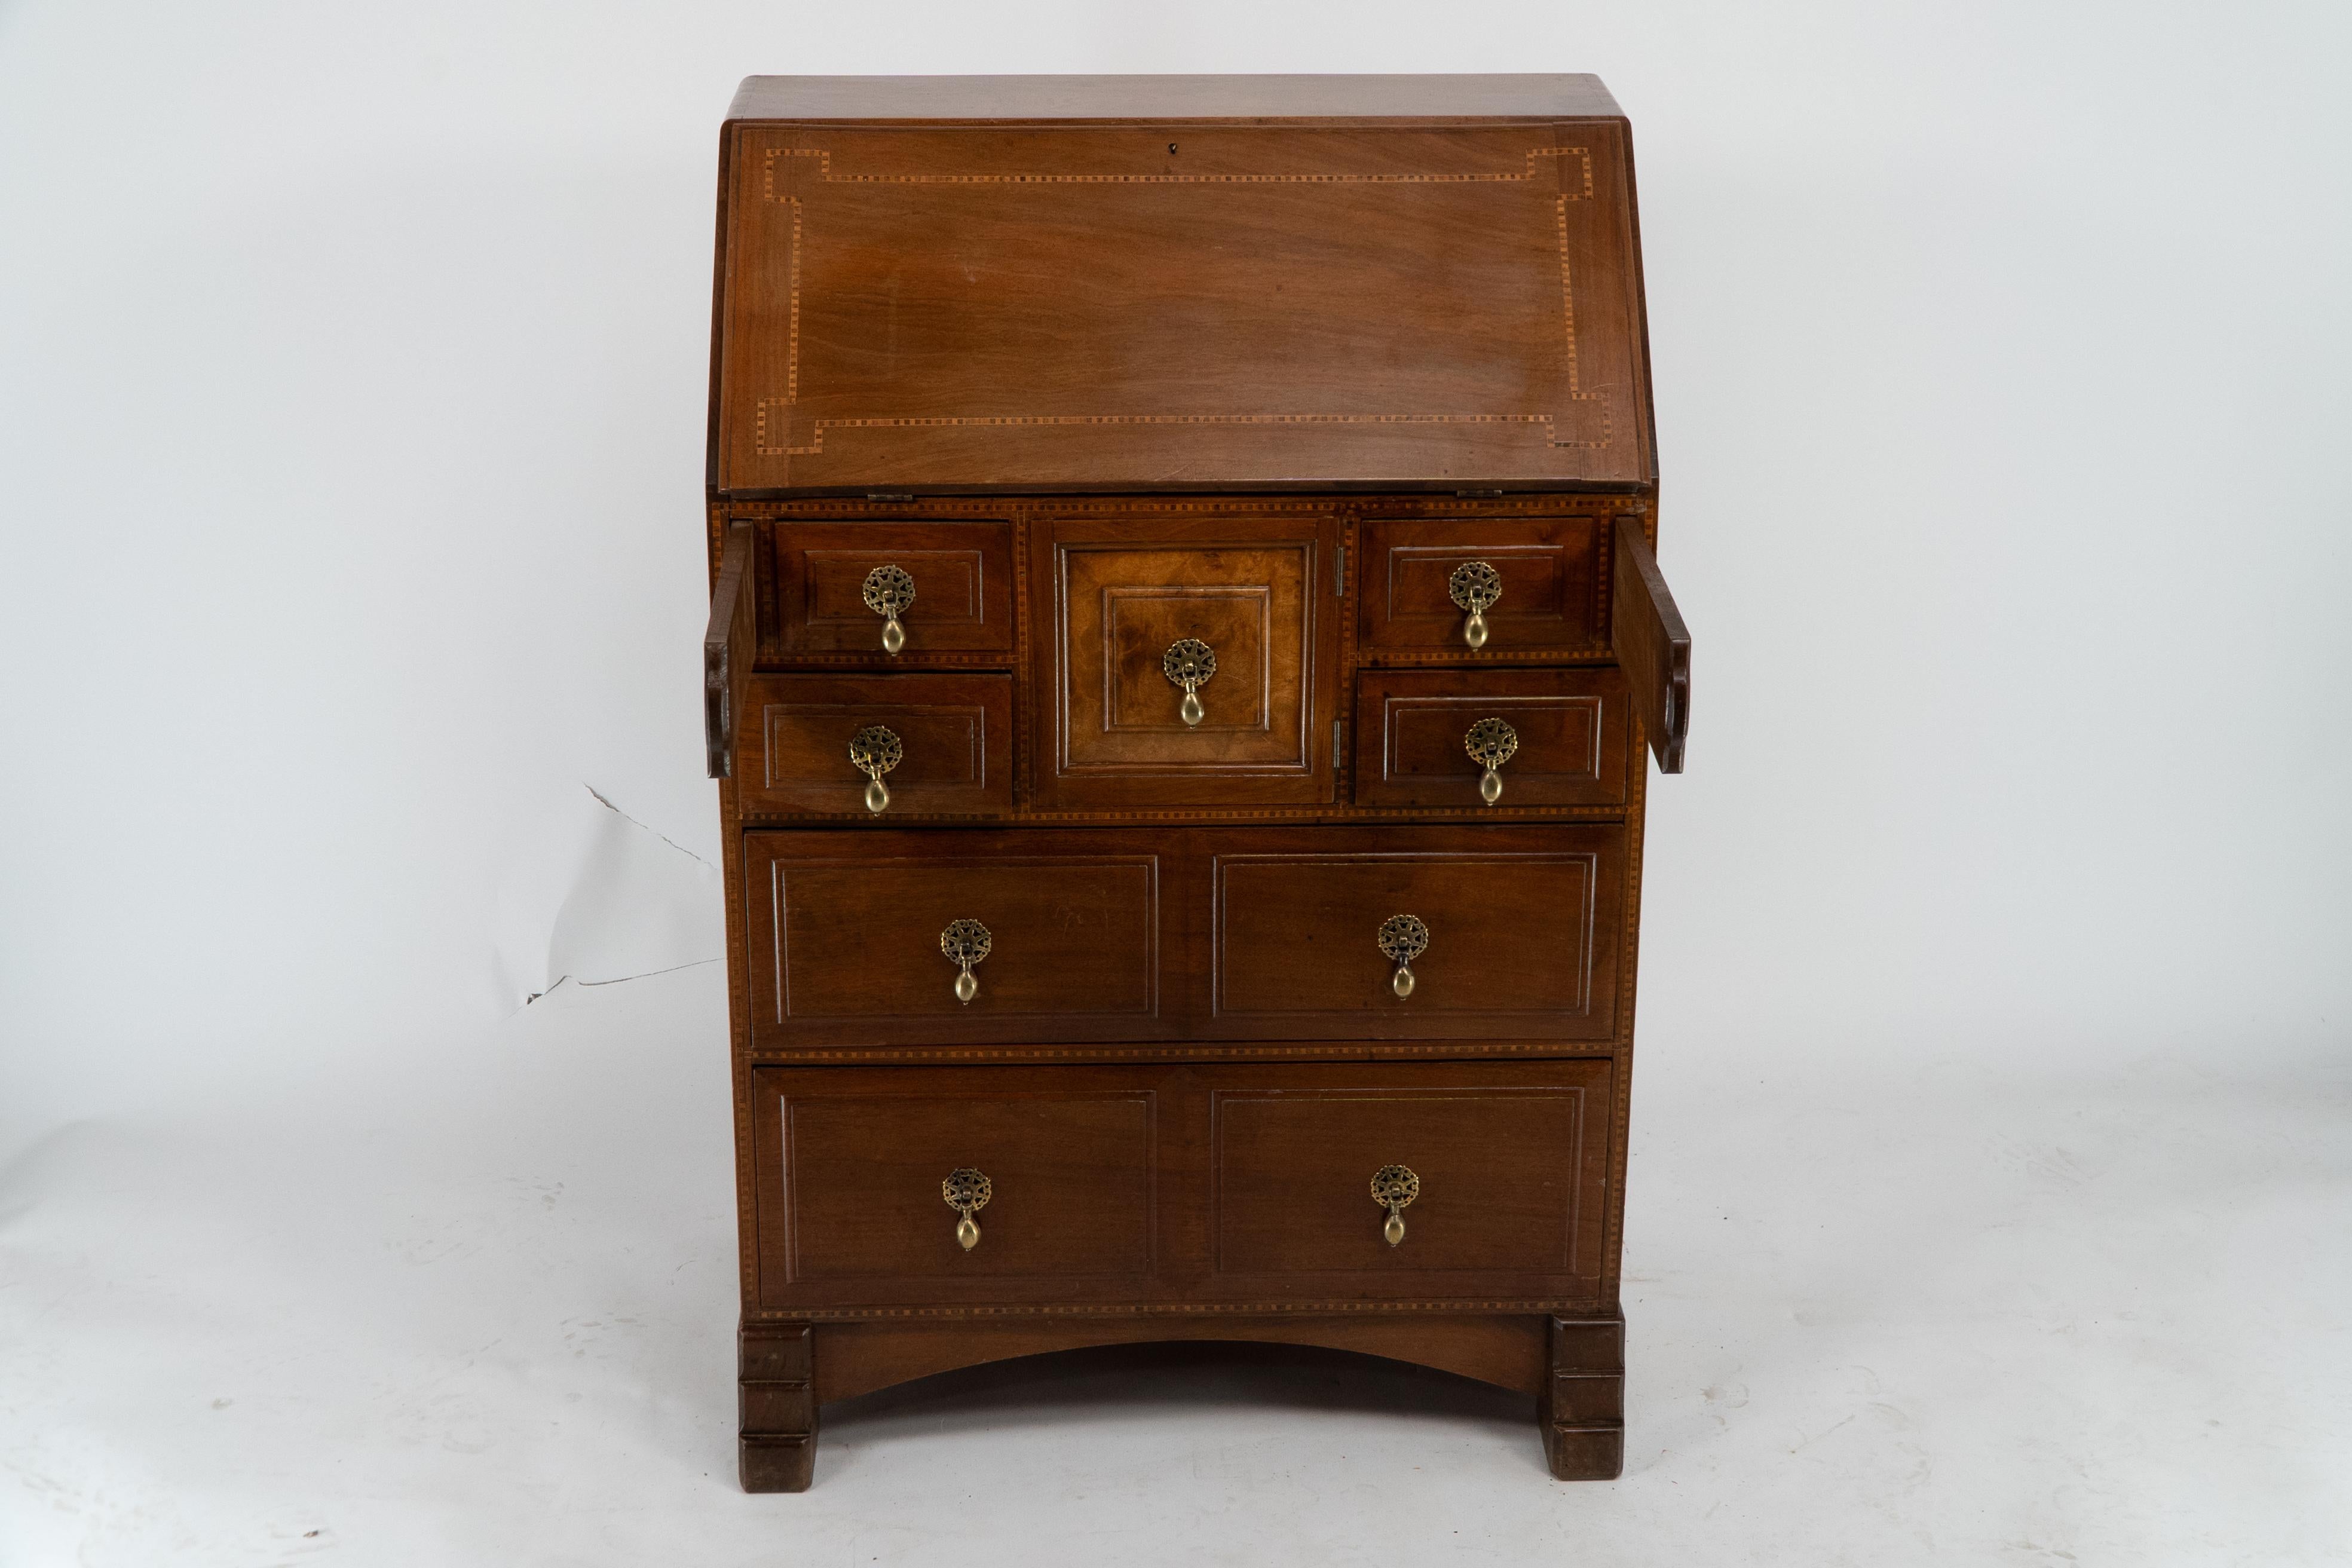 Ernest Gimson attributed. Arts & Crafts Cotswold school walnut bureau inlaid with holly chequered string inlay. The quality of this craftsman handmade bureau is a step above. The fold-down front is inlaid with holly chequered string inlay, opening